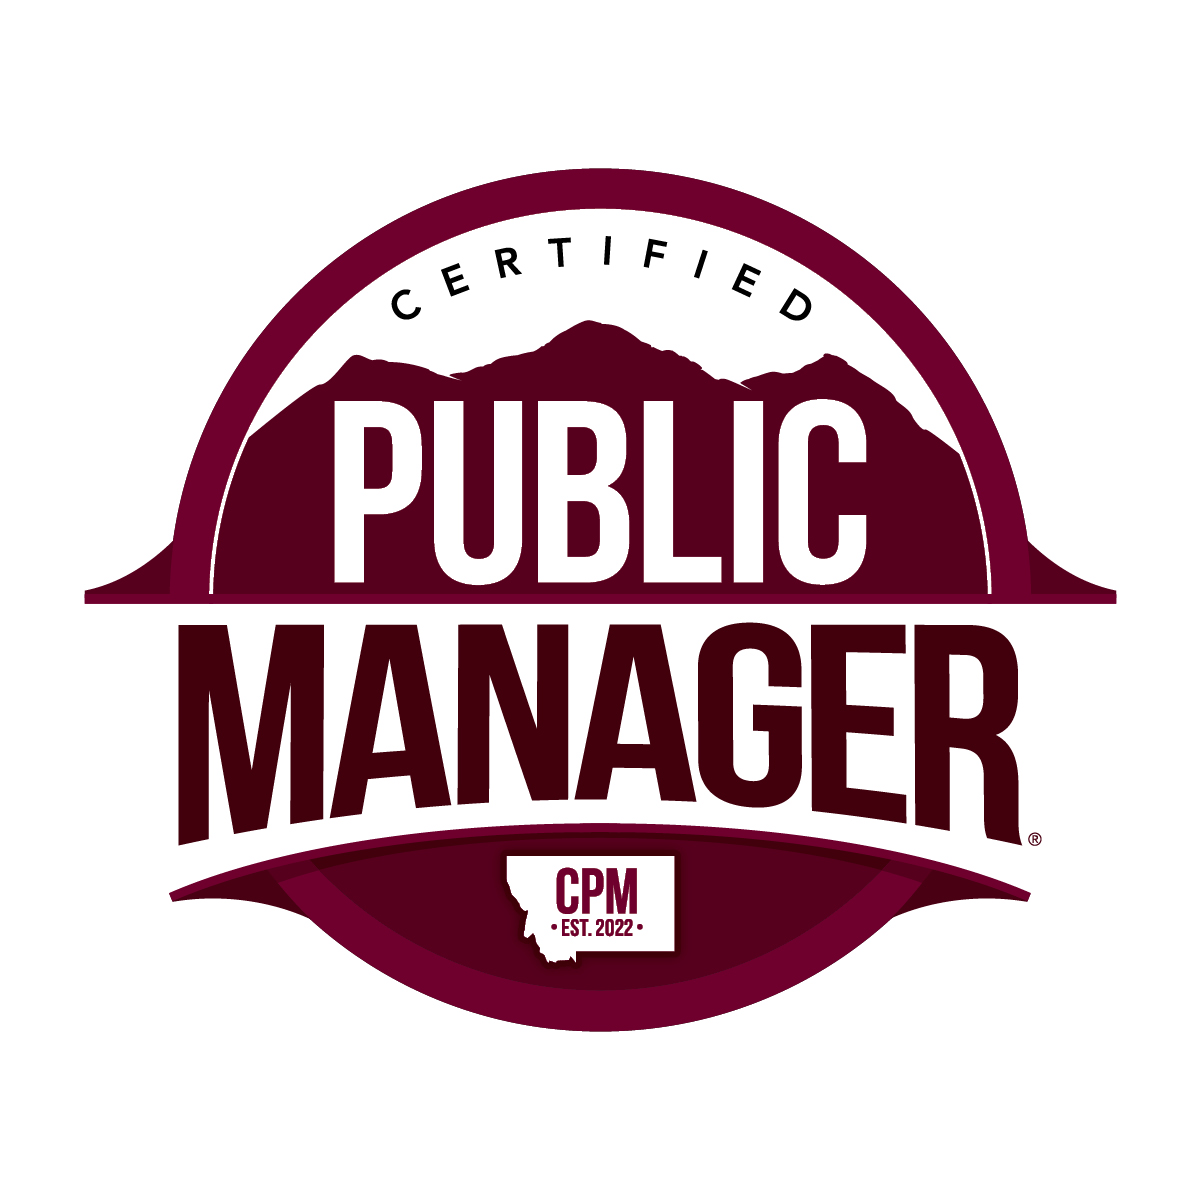 Certified Public Manager logo